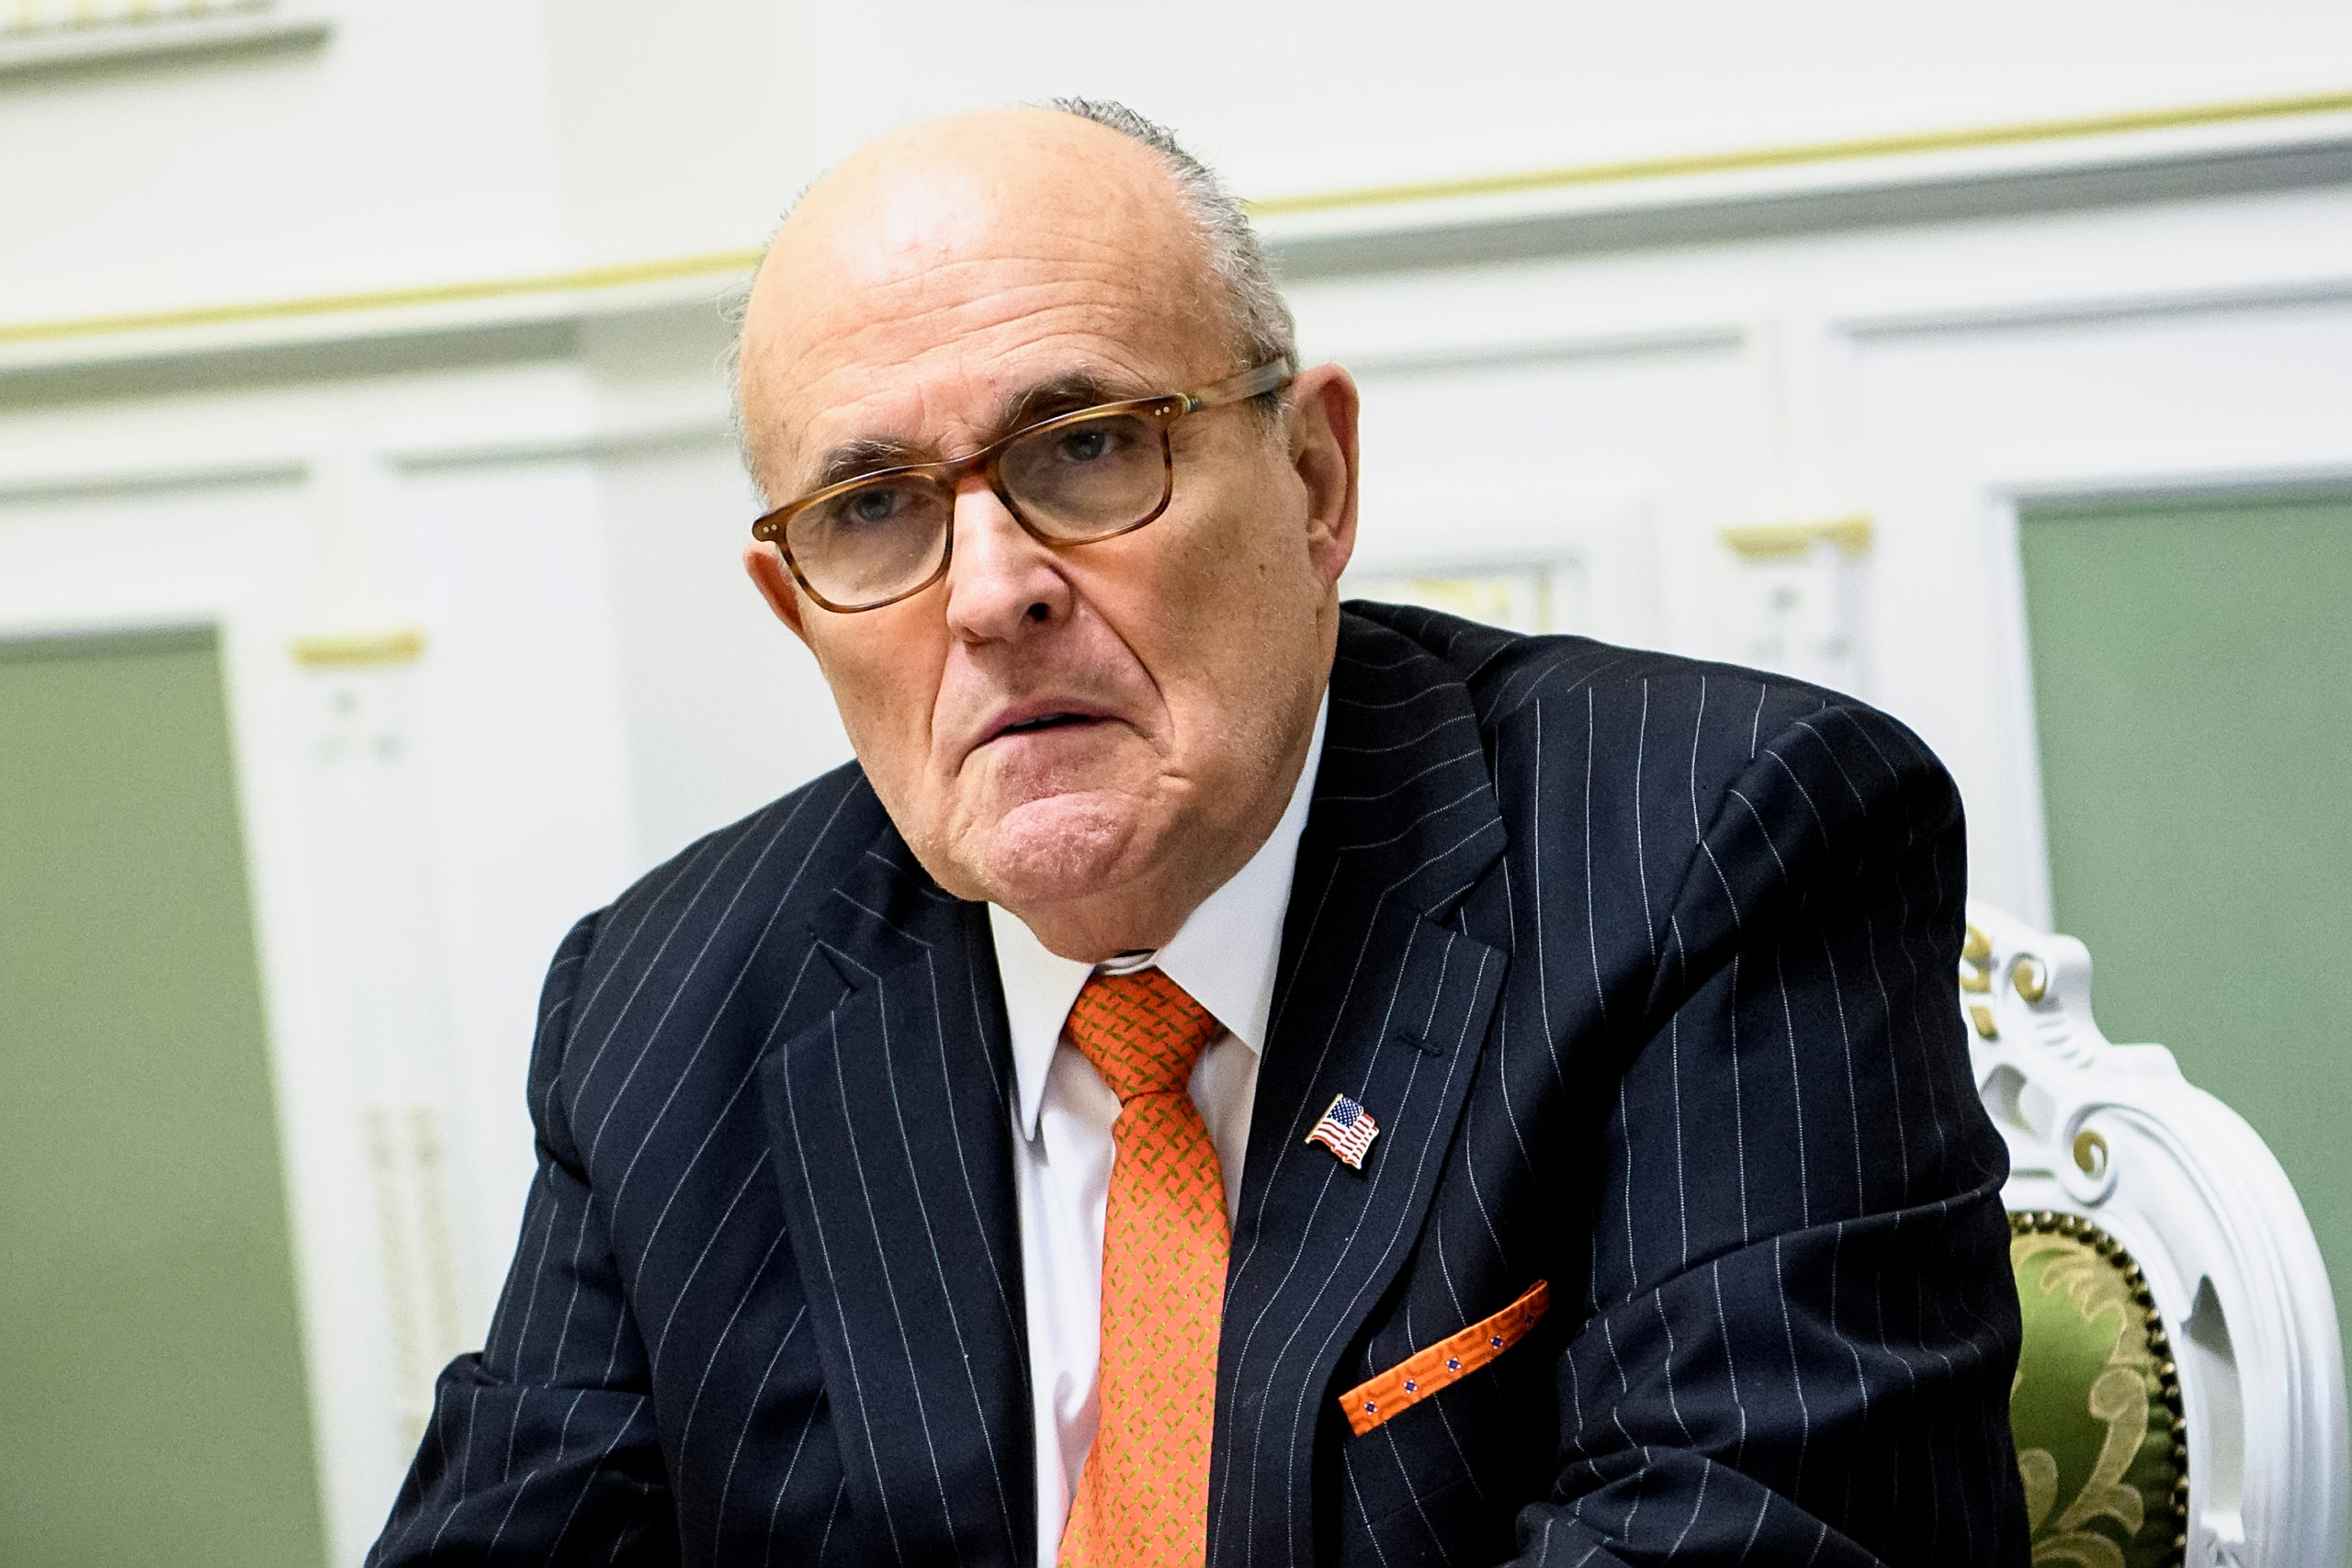 Former,New,York,City,Mayor,Rudy,Giuliani,During,Visit,To